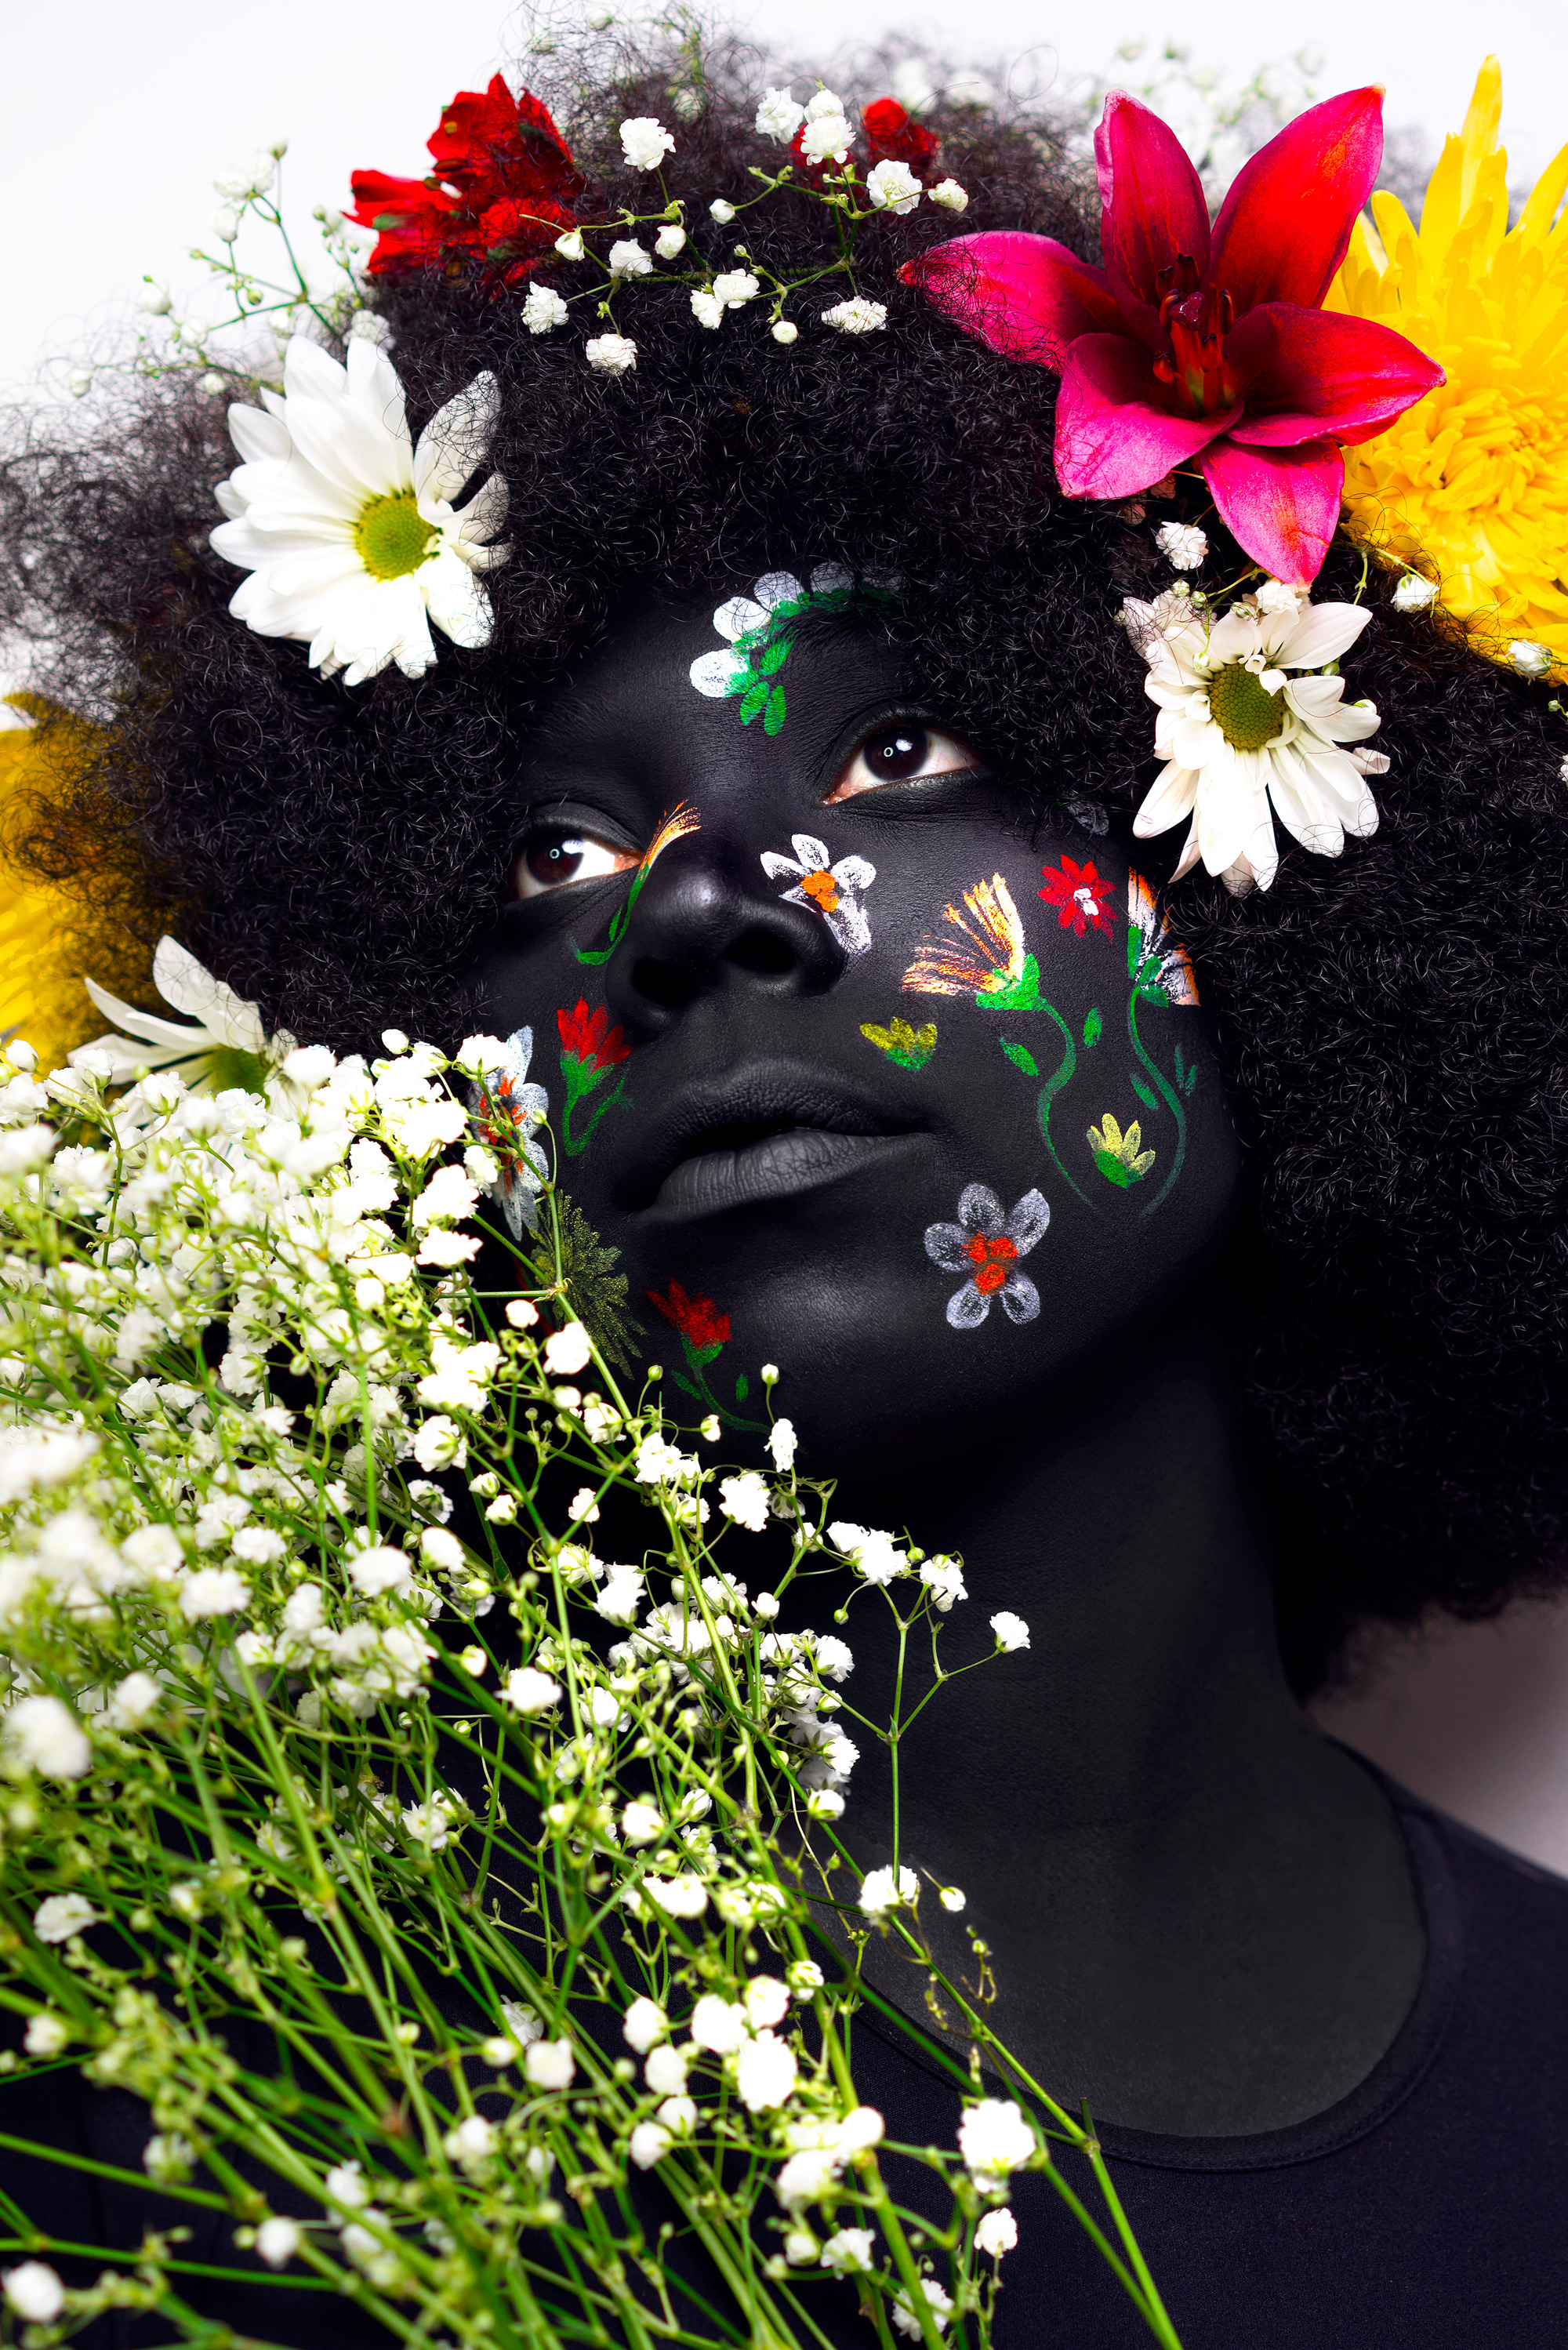 Flower-Filled Portraits by Diaja Celebrate Natural Beauty in the African Diaspora